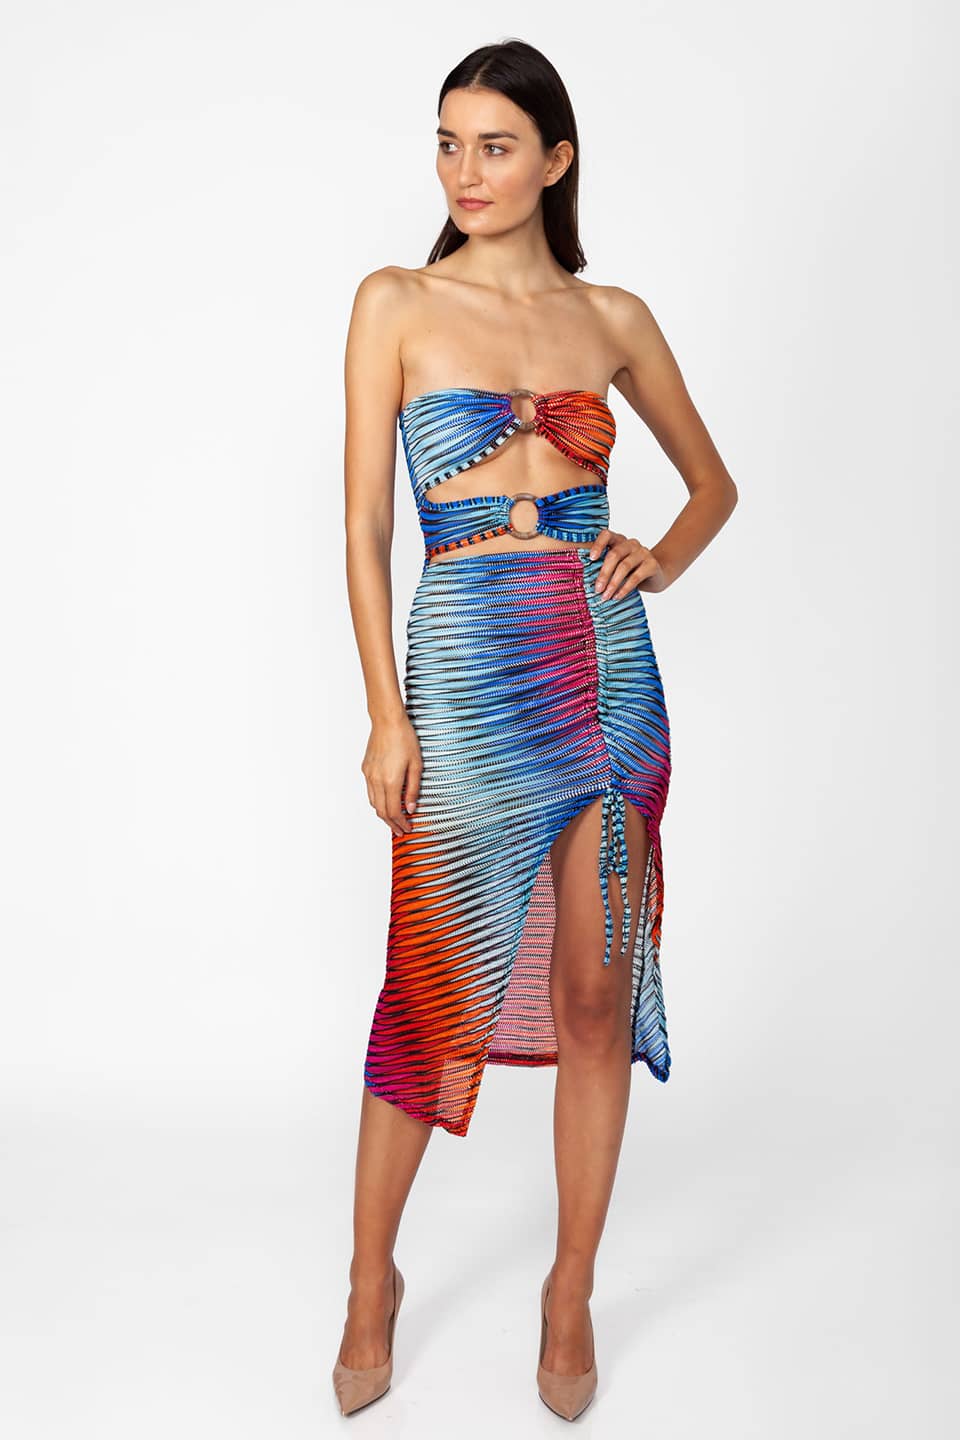 Beach queen midi dress, trendy, multicolor and sleeveless. Model in pose front view